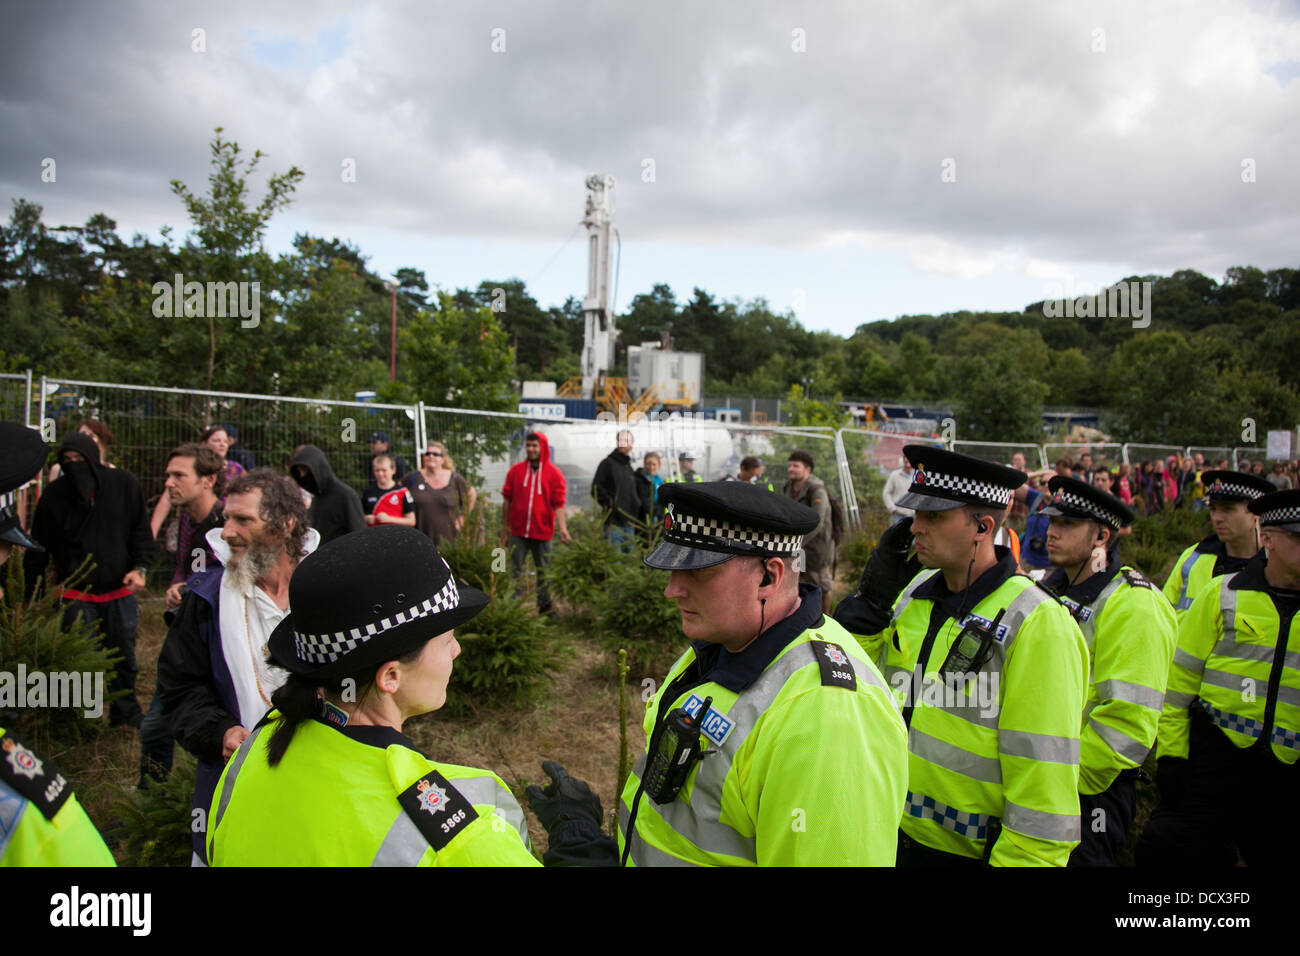 Police lines re-organize themselves to protect the Cuadrilla fracking test site against peaceful environmental activists. Stock Photo